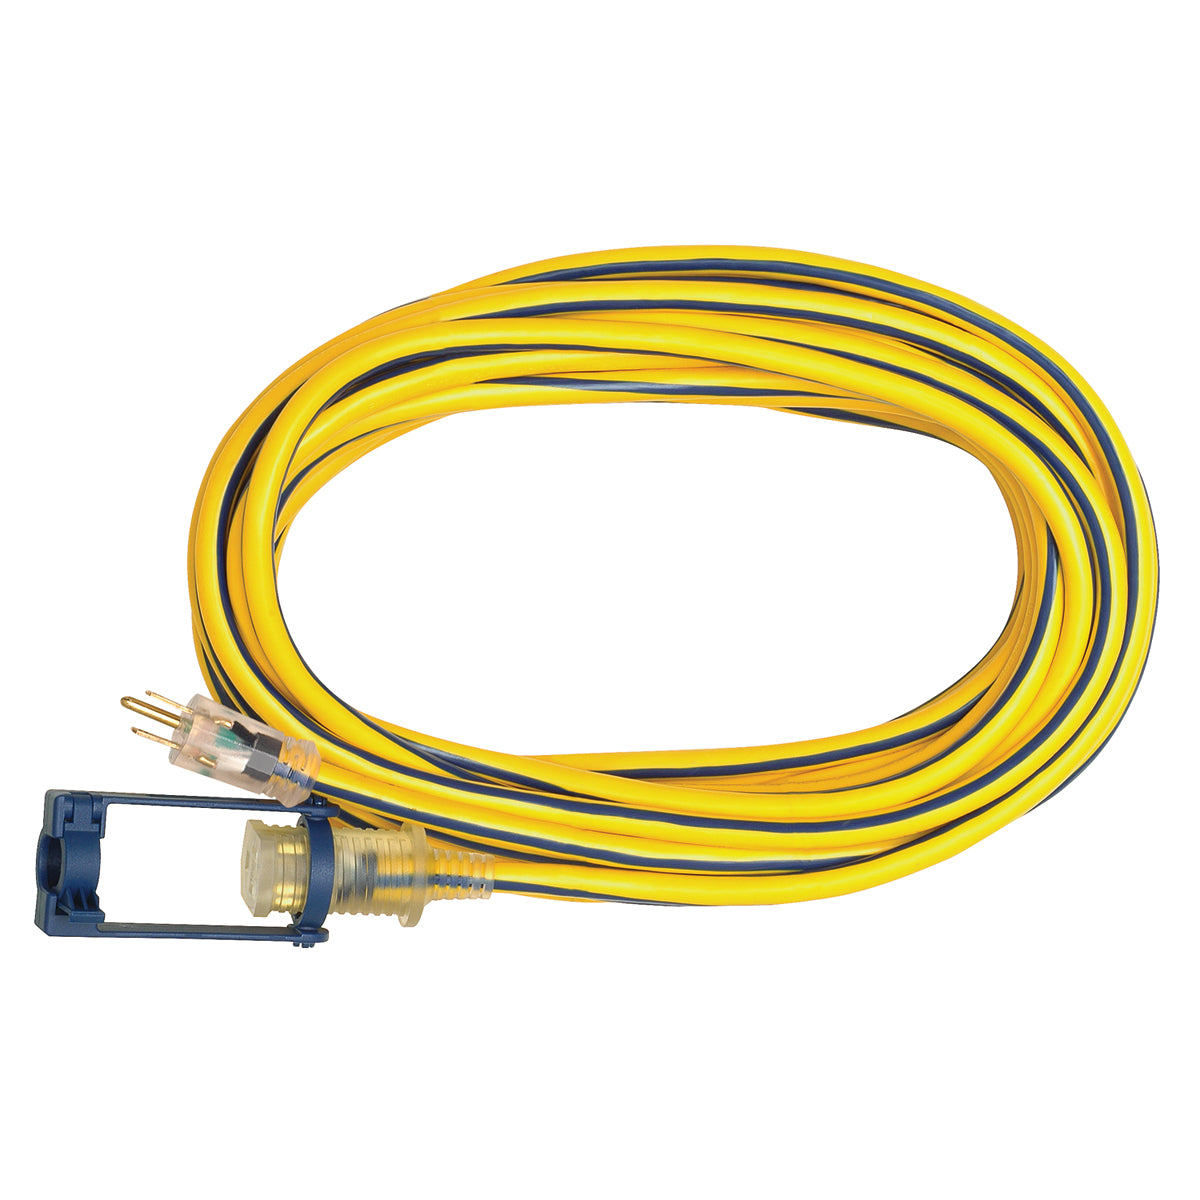 12/3X100' YELLOW/BLUE EXT. CORD, LIGHTED ENDS